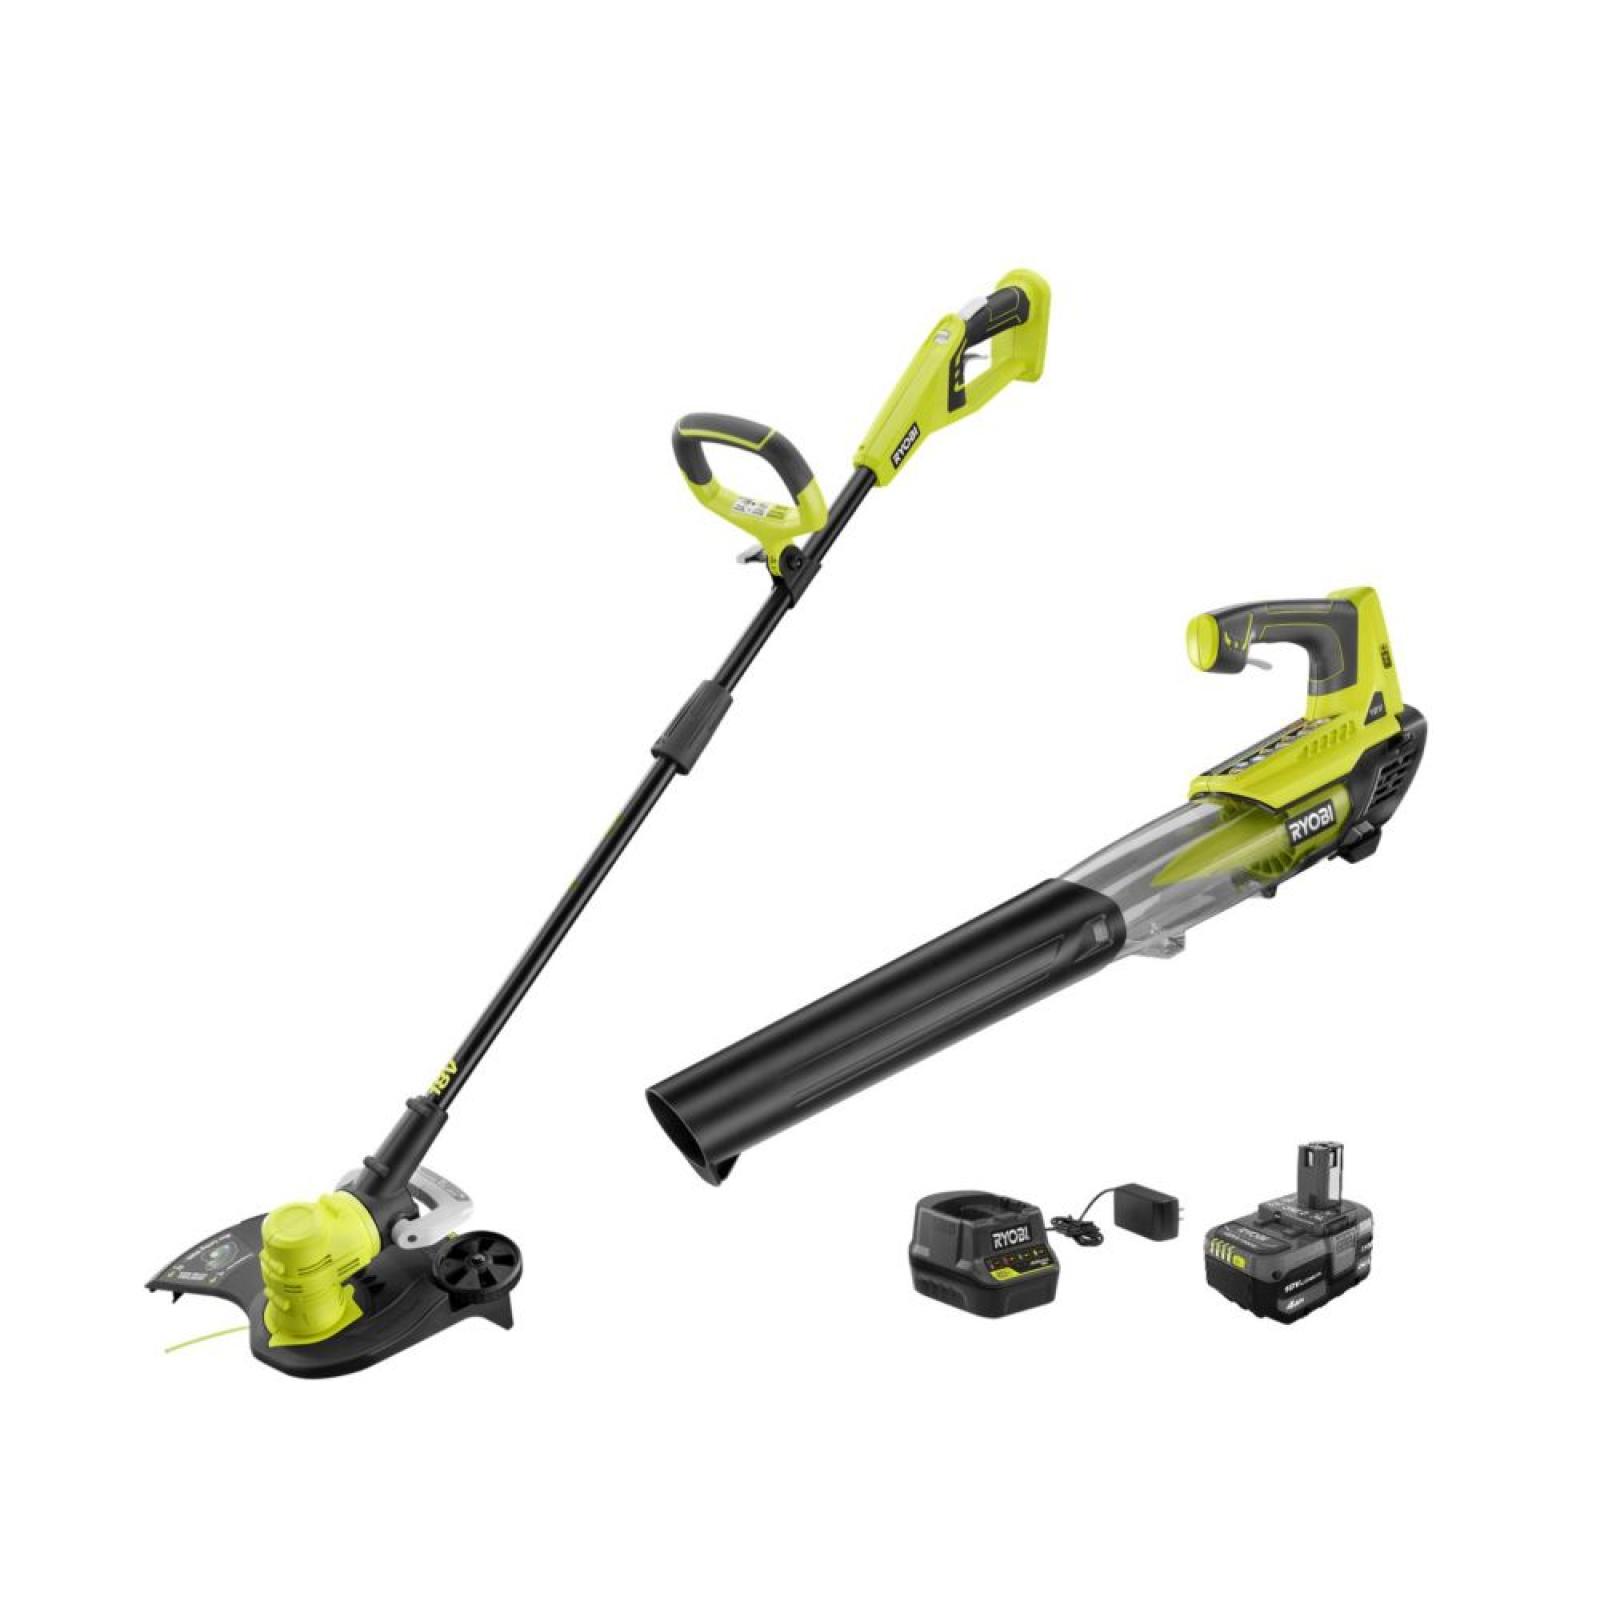 NEW RYOBI ONE+ 18V Cordless Battery String Trimmer/Edger and Jet Fan Blower Combo Kit with 4.0 Ah Battery and Charger